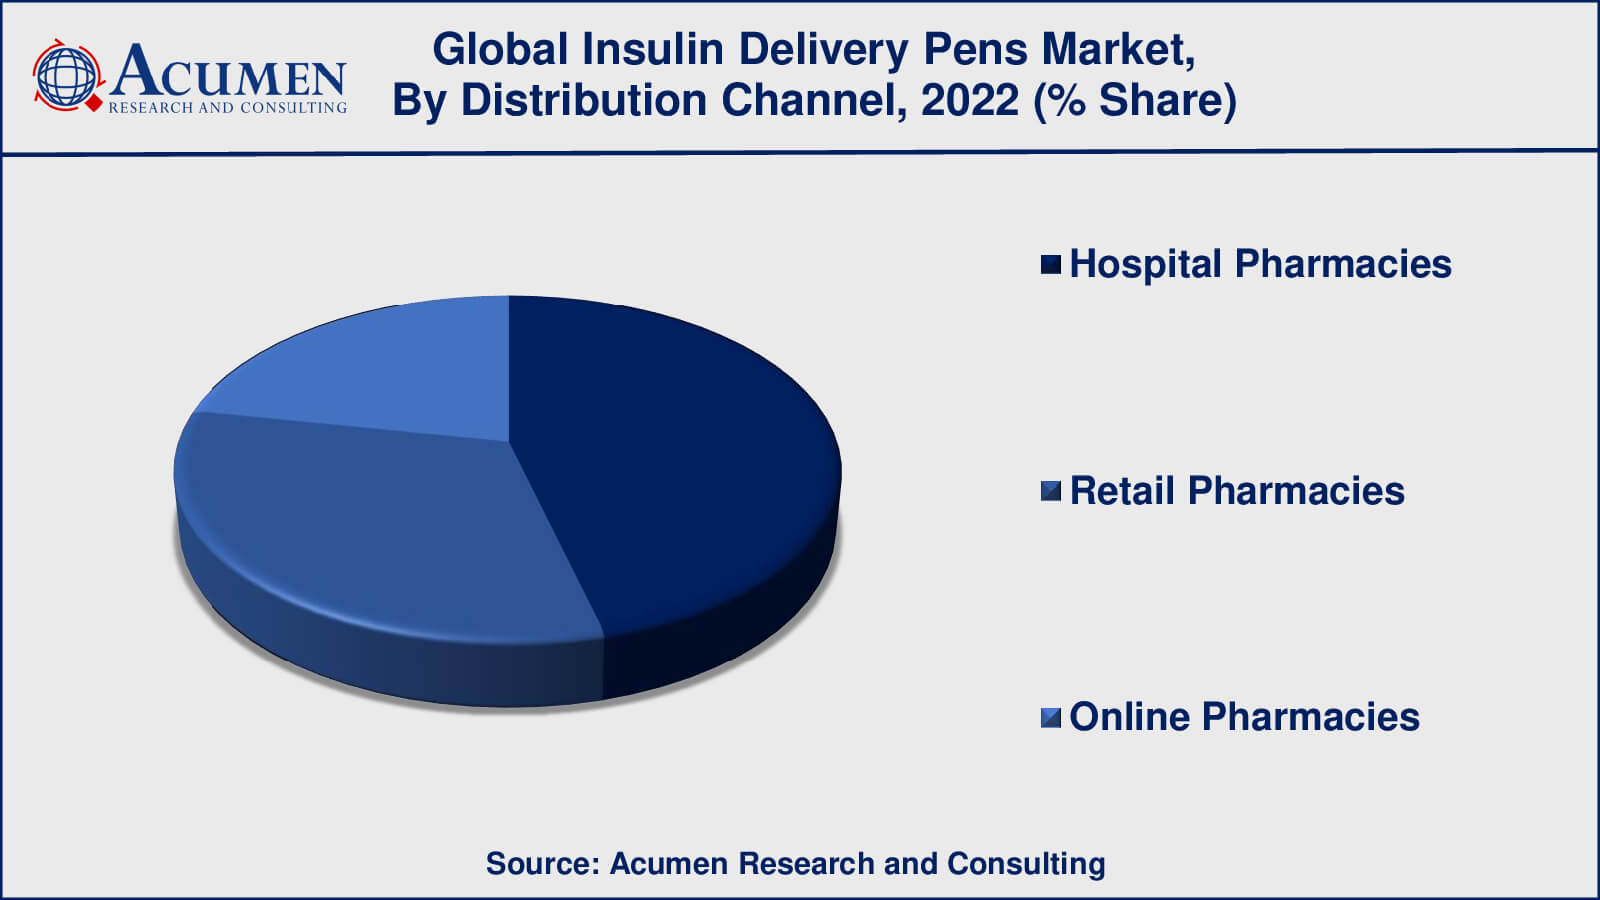 Insulin Delivery Pens Market Drivers